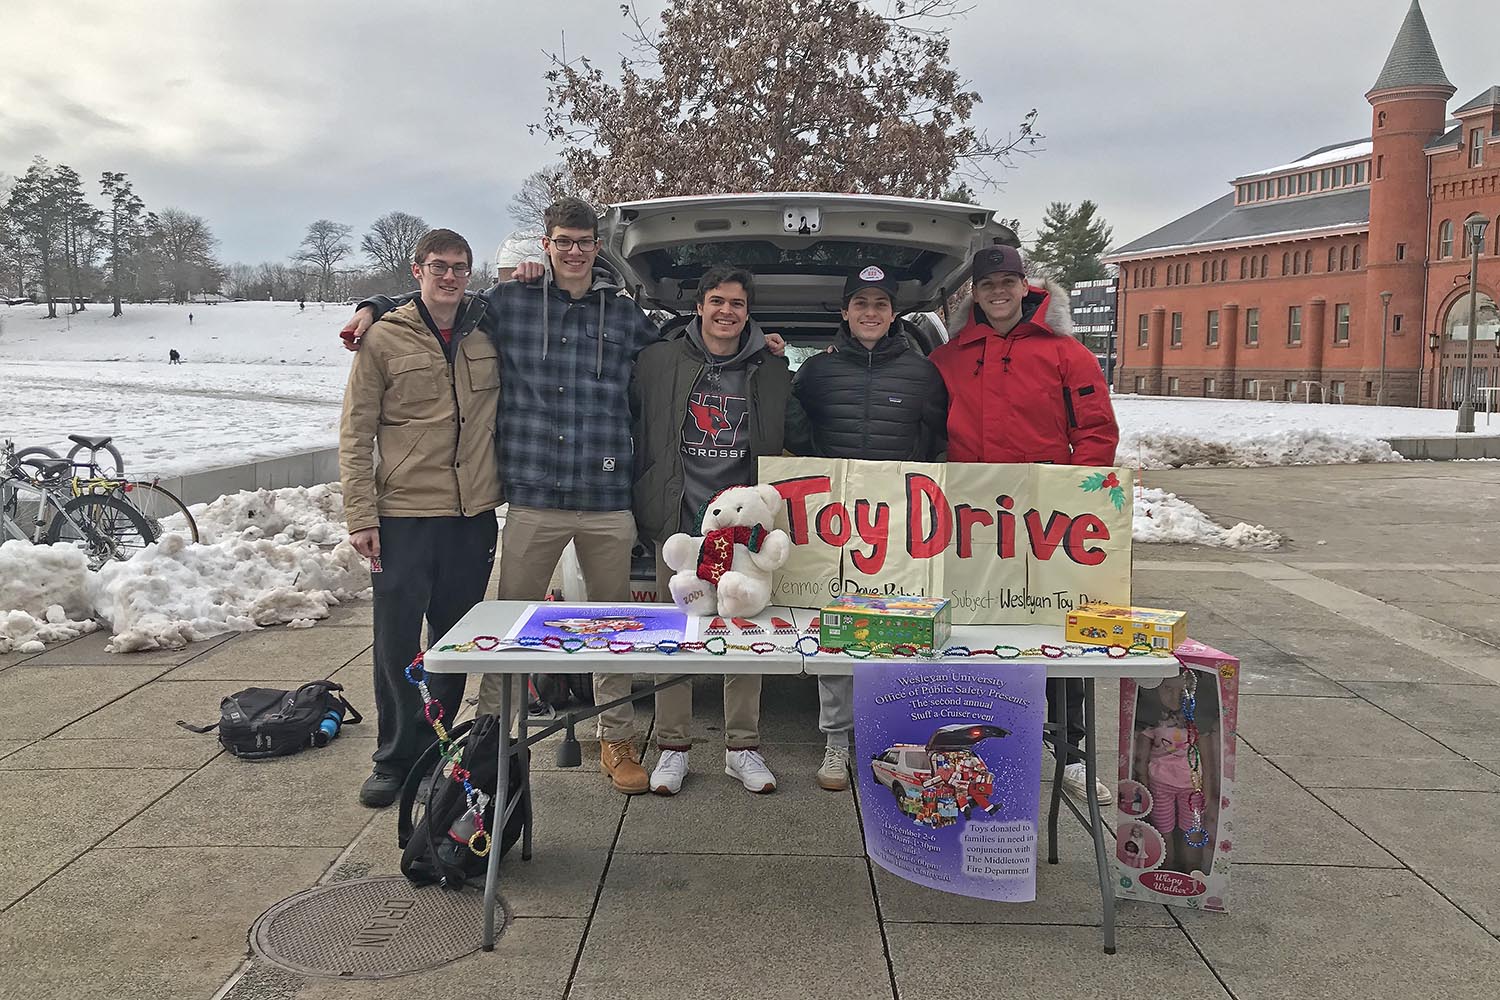 The University partnered with the Middletown Fire Department by collecting donations to benefit local children in need during the holidays and throughout the year.